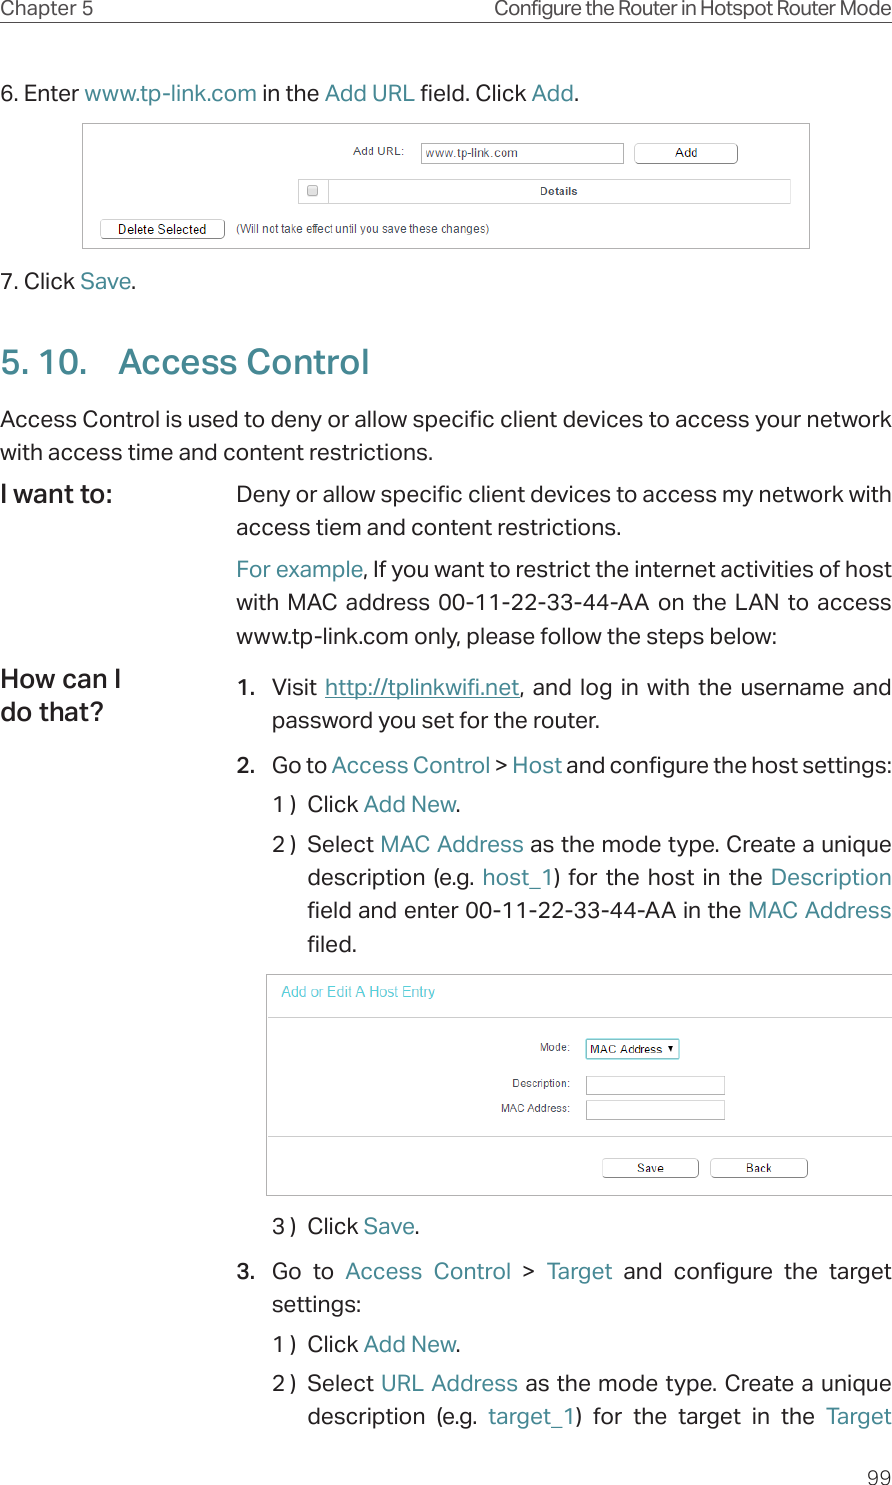 99Chapter 5 Configure the Router in Hotspot Router Mode6. Enter www.tp-link.com in the Add URL field. Click Add.7. Click Save.5. 10.  Access ControlAccess Control is used to deny or allow specific client devices to access your network with access time and content restrictions.Deny or allow specific client devices to access my network with access tiem and content restrictions.For example, If you want to restrict the internet activities of host with MAC address 00-11-22-33-44-AA on the LAN to access www.tp-link.com only, please follow the steps below:1.  Visit  http://tplinkwifi.net, and log in with the username and password you set for the router.2.  Go to Access Control &gt; Host and configure the host settings:1 )  Click Add New.2 )  Select MAC Address as the mode type. Create a unique description (e.g. host_1) for the host in the Description field and enter 00-11-22-33-44-AA in the MAC Address filed.3 )  Click Save.3.  Go to Access Control &gt; Target and configure the target settings:1 )  Click Add New.2 )  Select URL Address as the mode type. Create a unique description (e.g. target_1) for the target in the Target I want to:How can I do that?